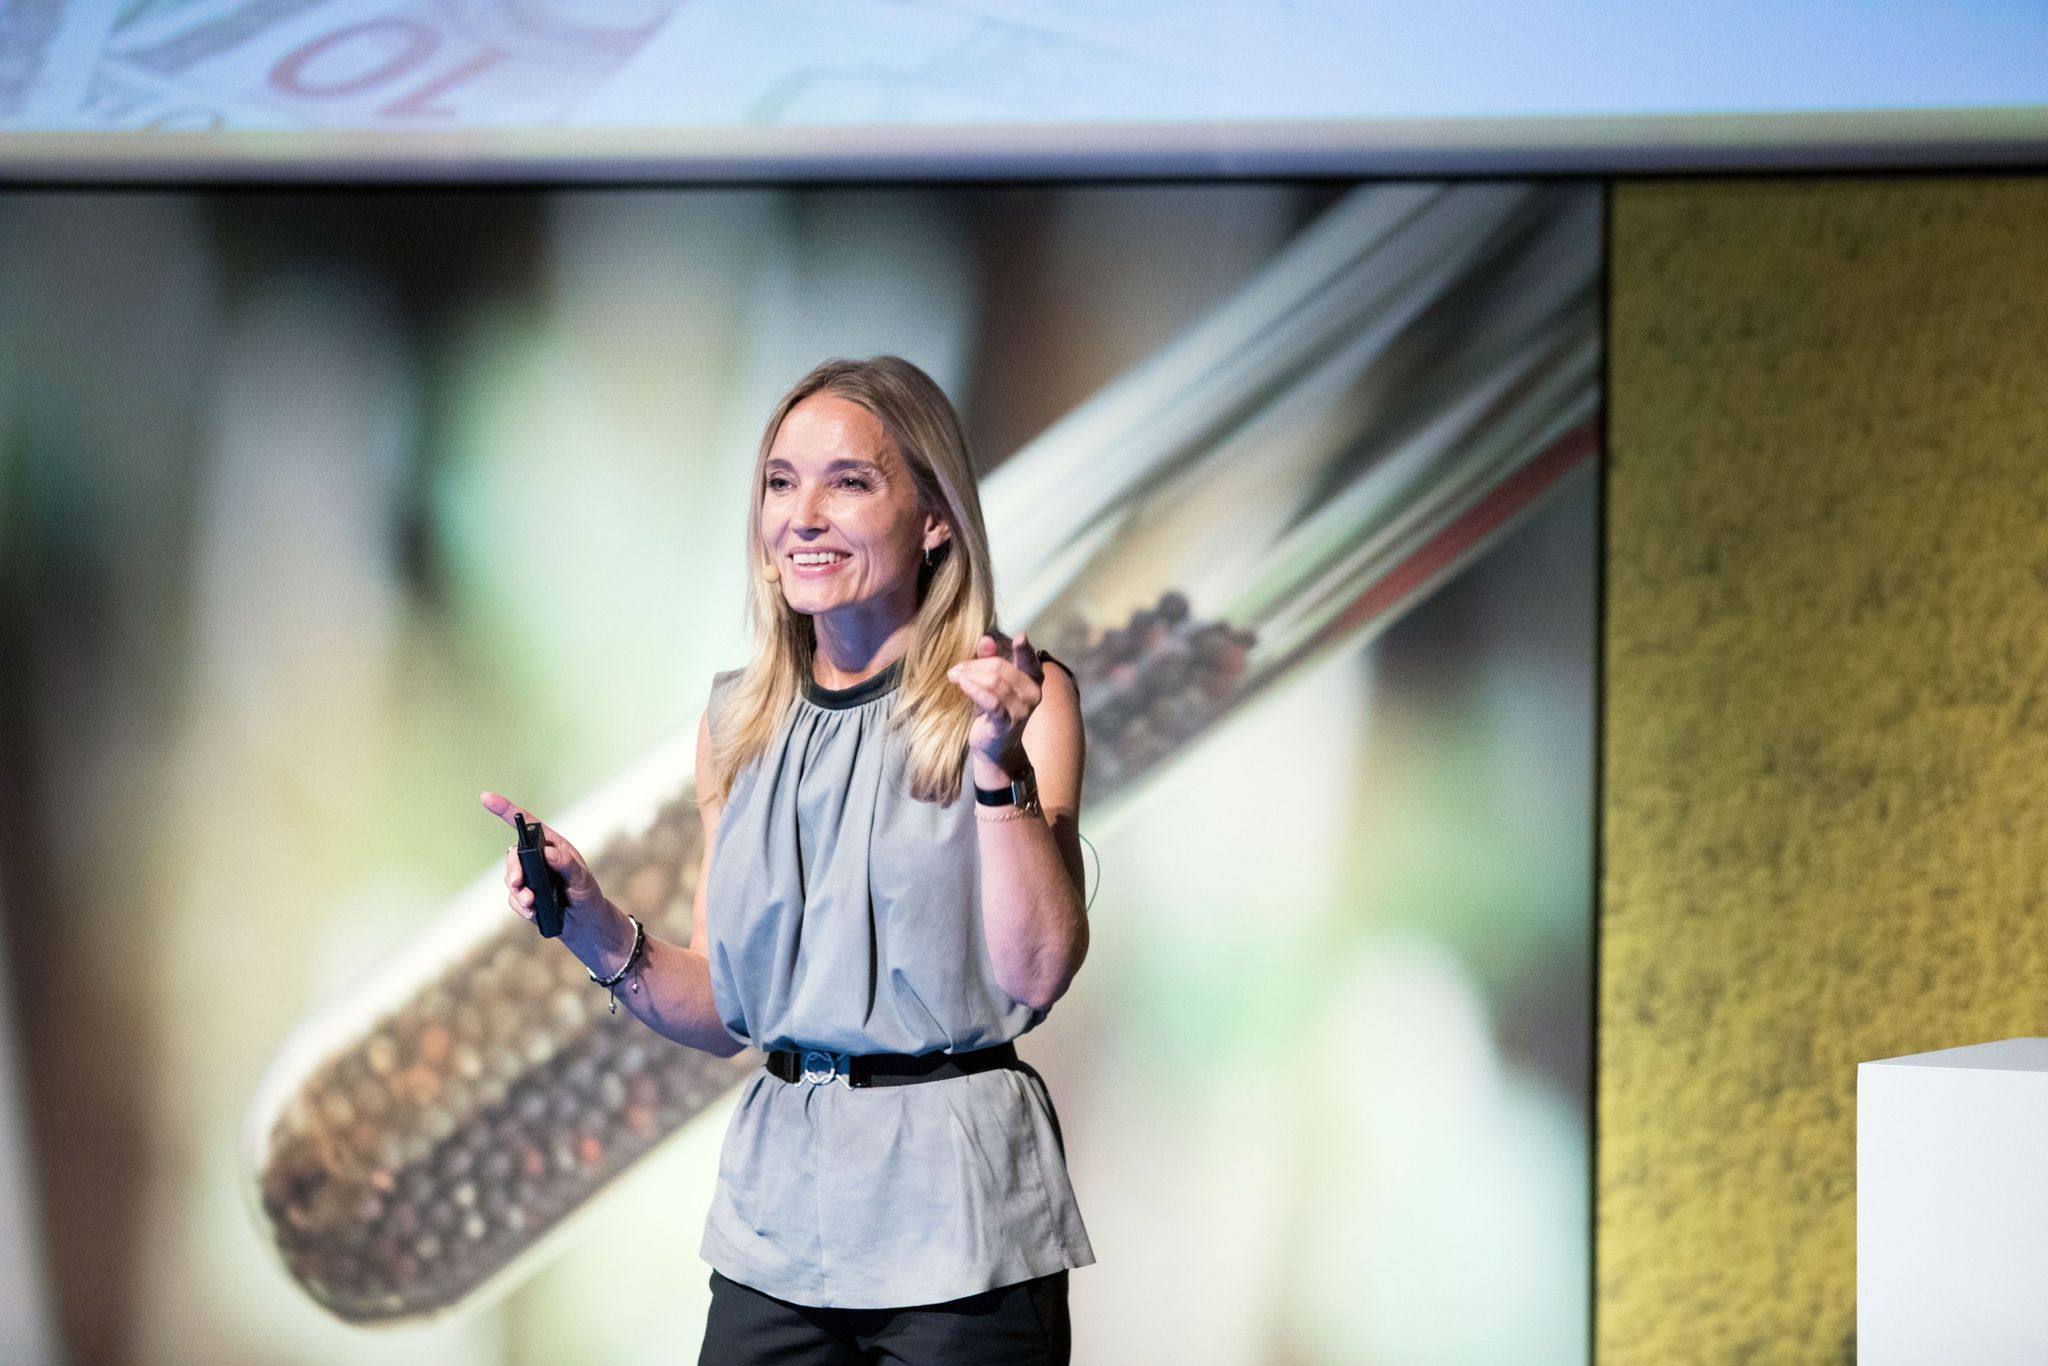 Malene Rydahl speaks in Paris on wellbeing and performance. The author of Happy As a Dane: 10 Secrets of the Happiest People in the World shares 10 secrets to happiness from her country, Denmark, regularly ranked among the most happy places in the world. Photo: Malene Rydahl